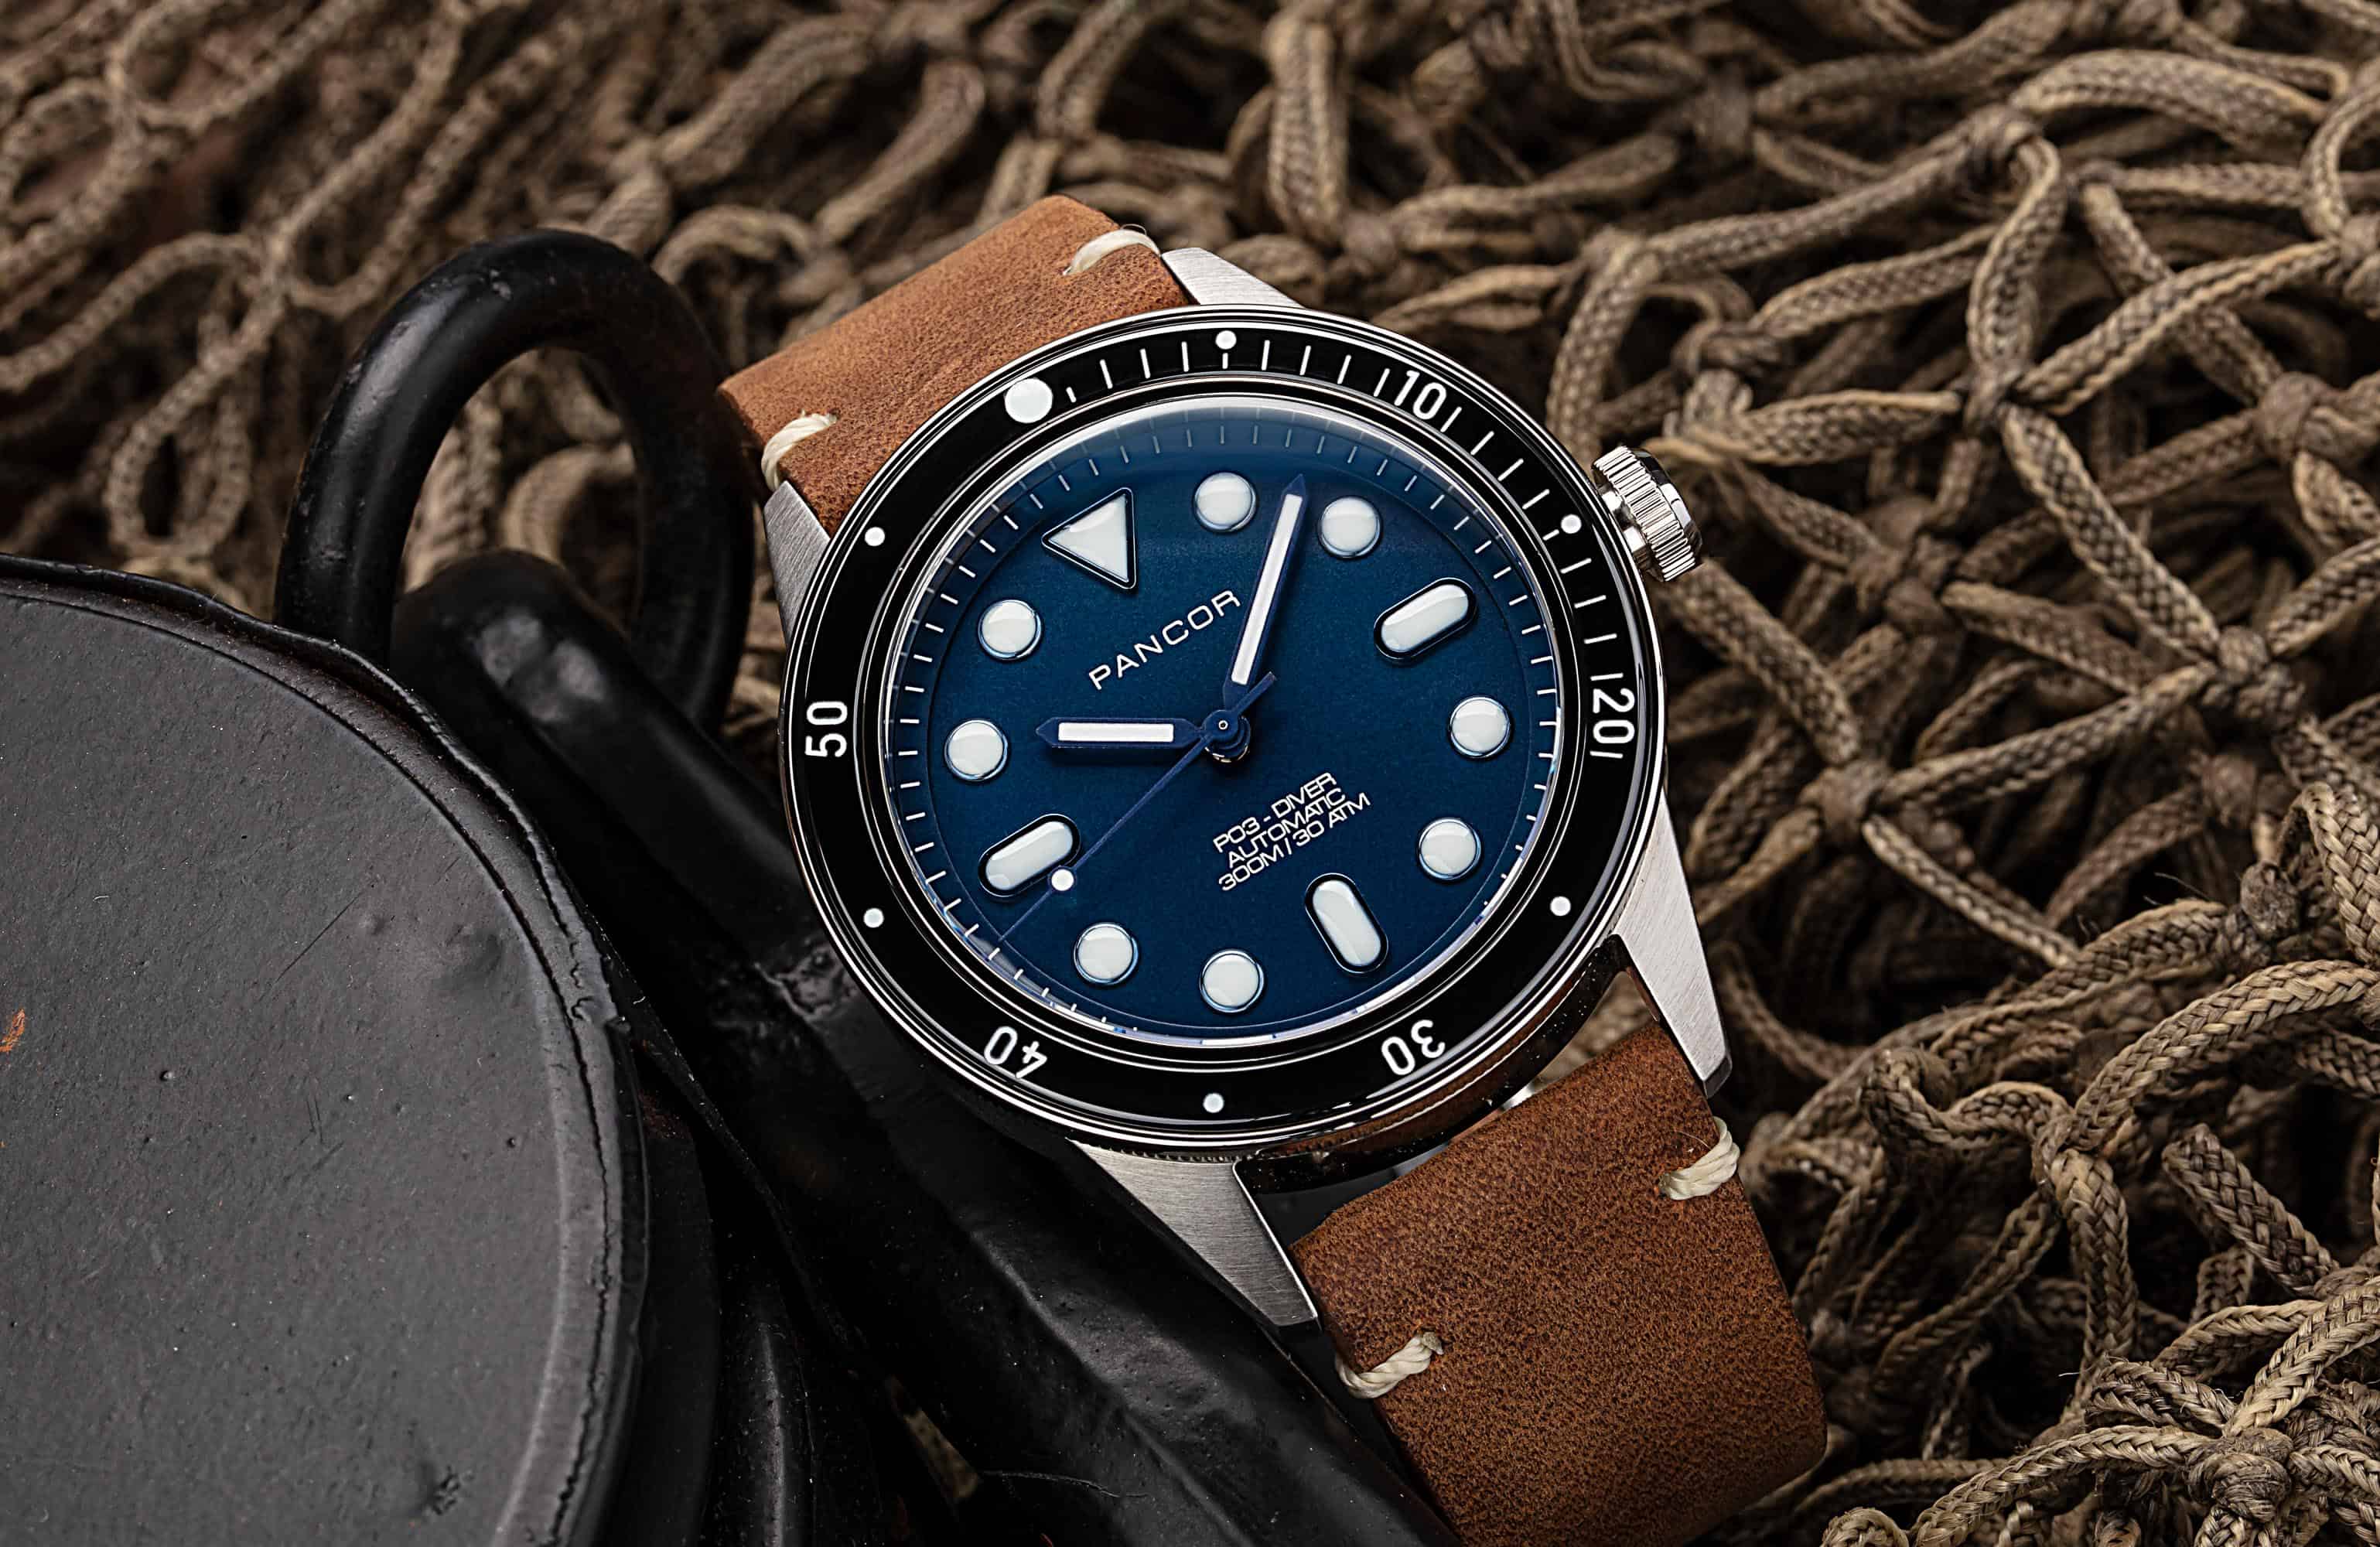 Introducing the Pancor P03, an Affordable Diver With Excellent Specs and Old-School Vibes